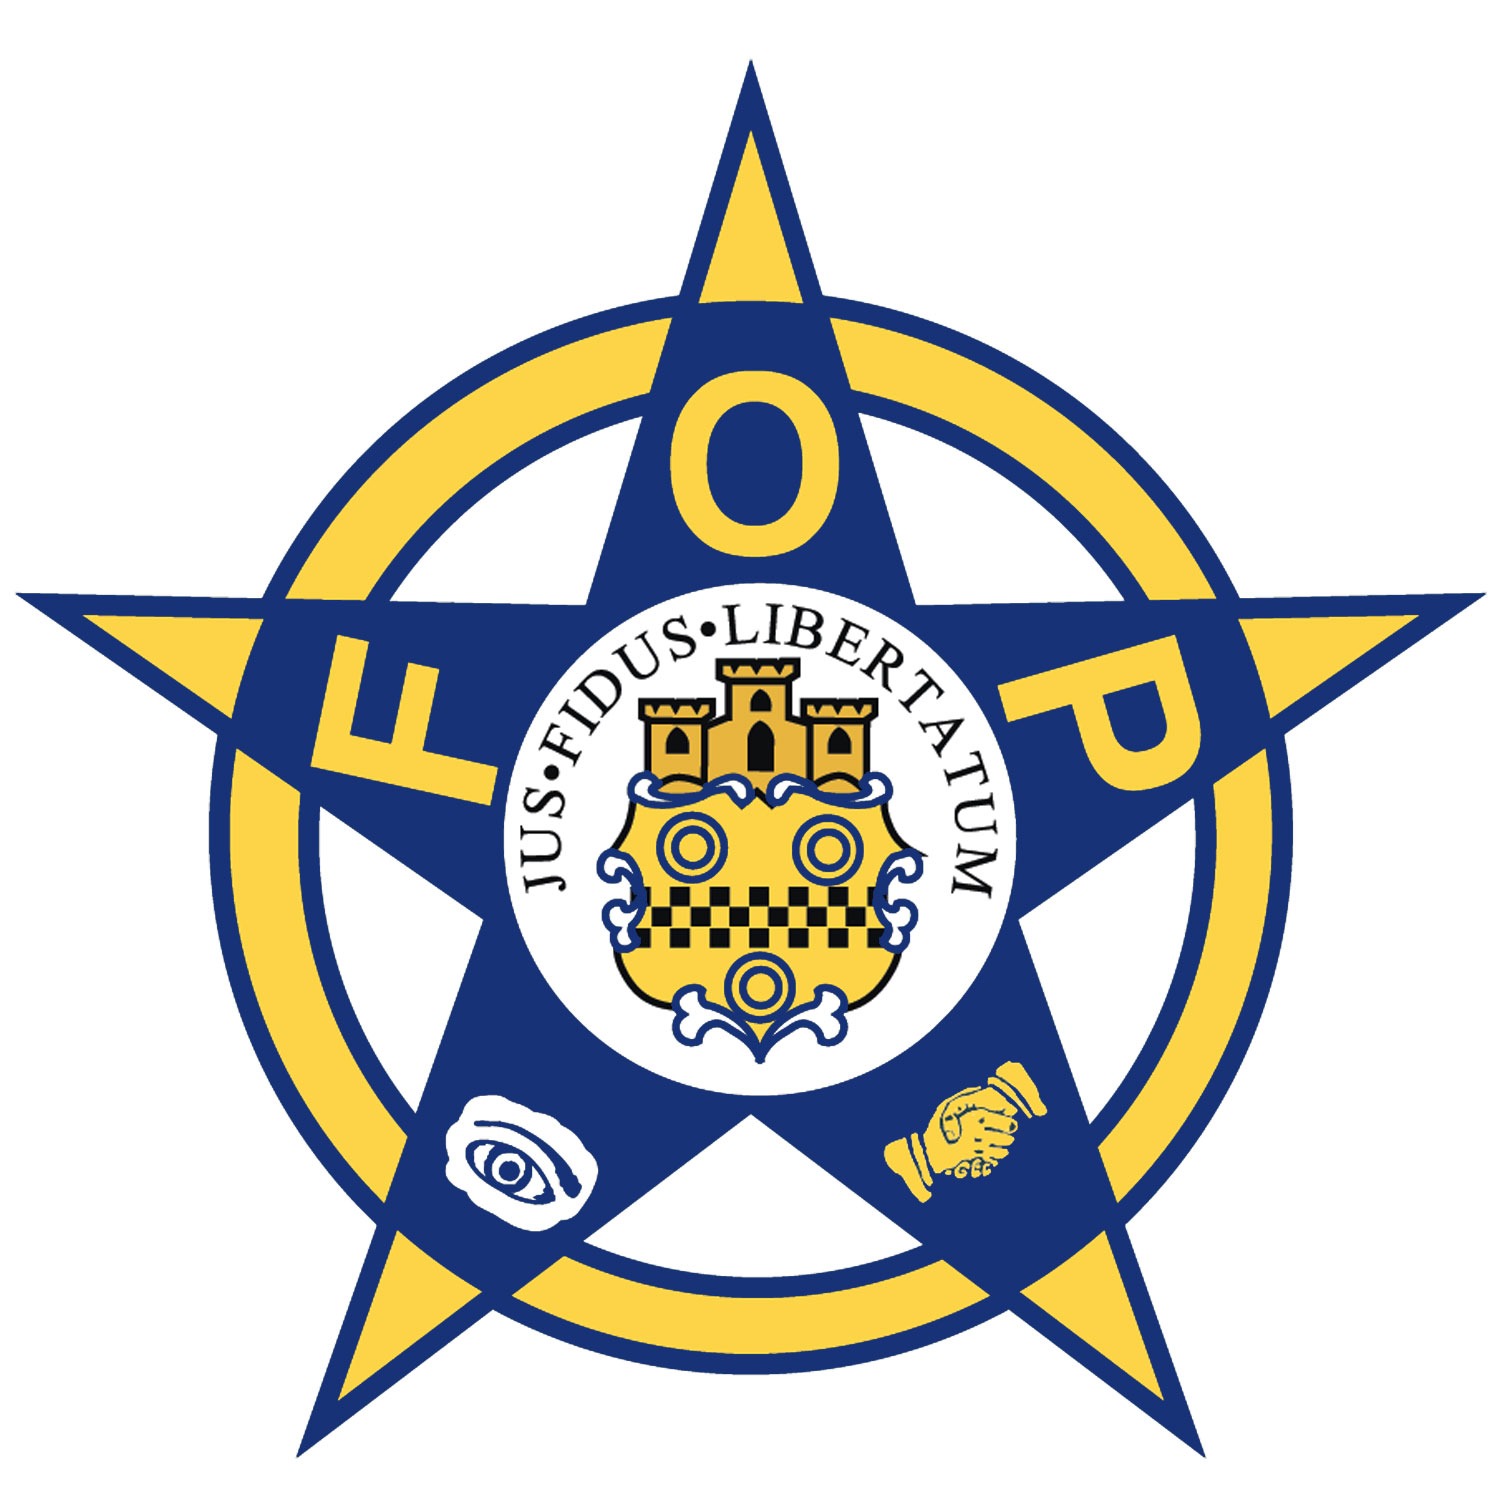 The Fraternal Order of Police